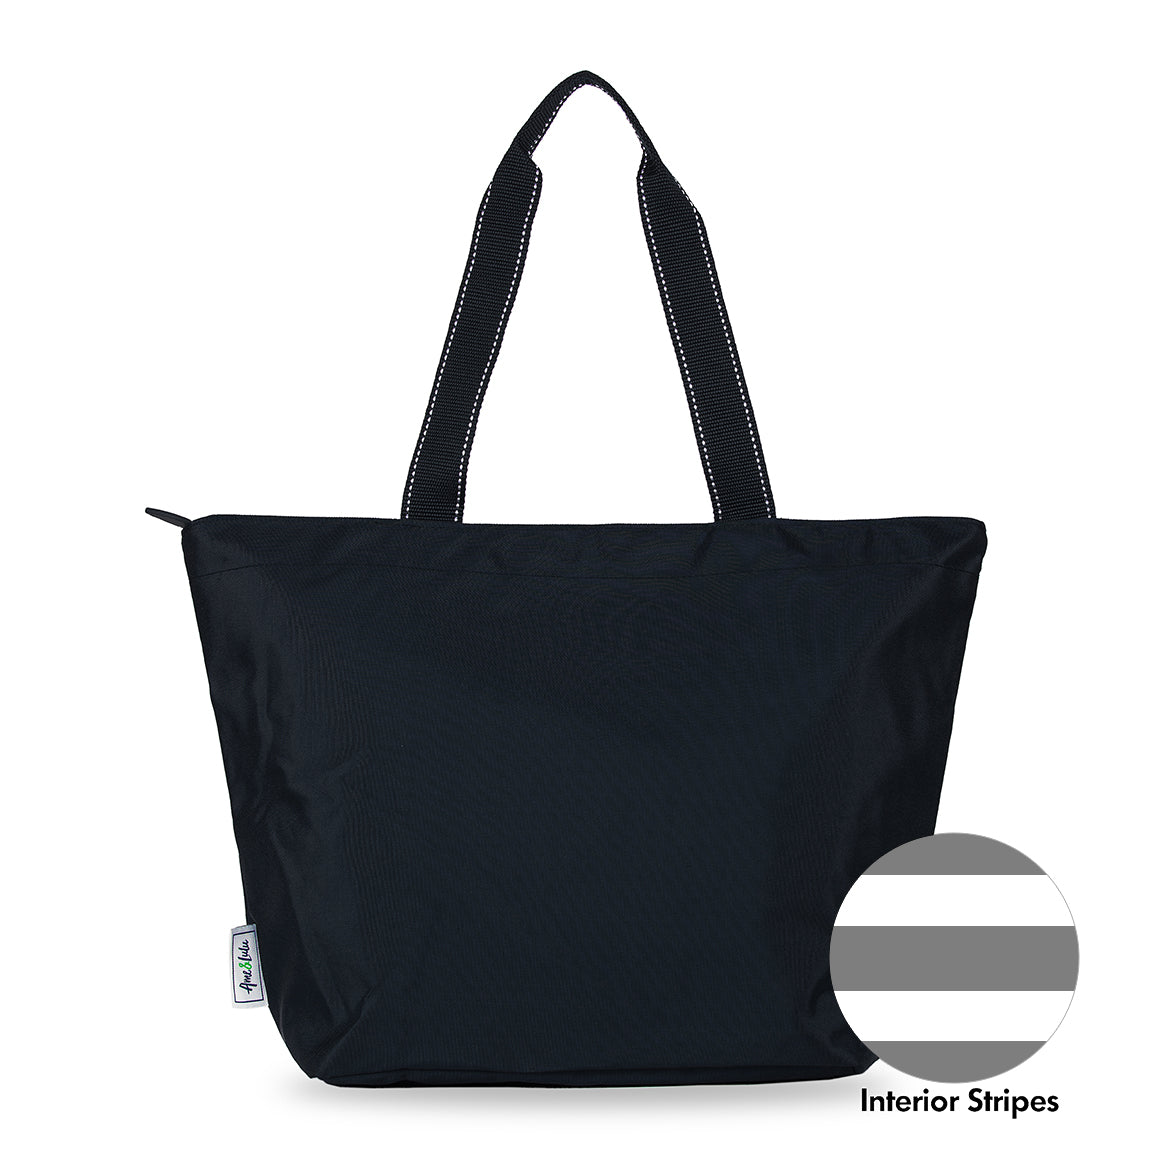 black nylon tote with black straps that shows a swatch next to it with gray and white interior stripes